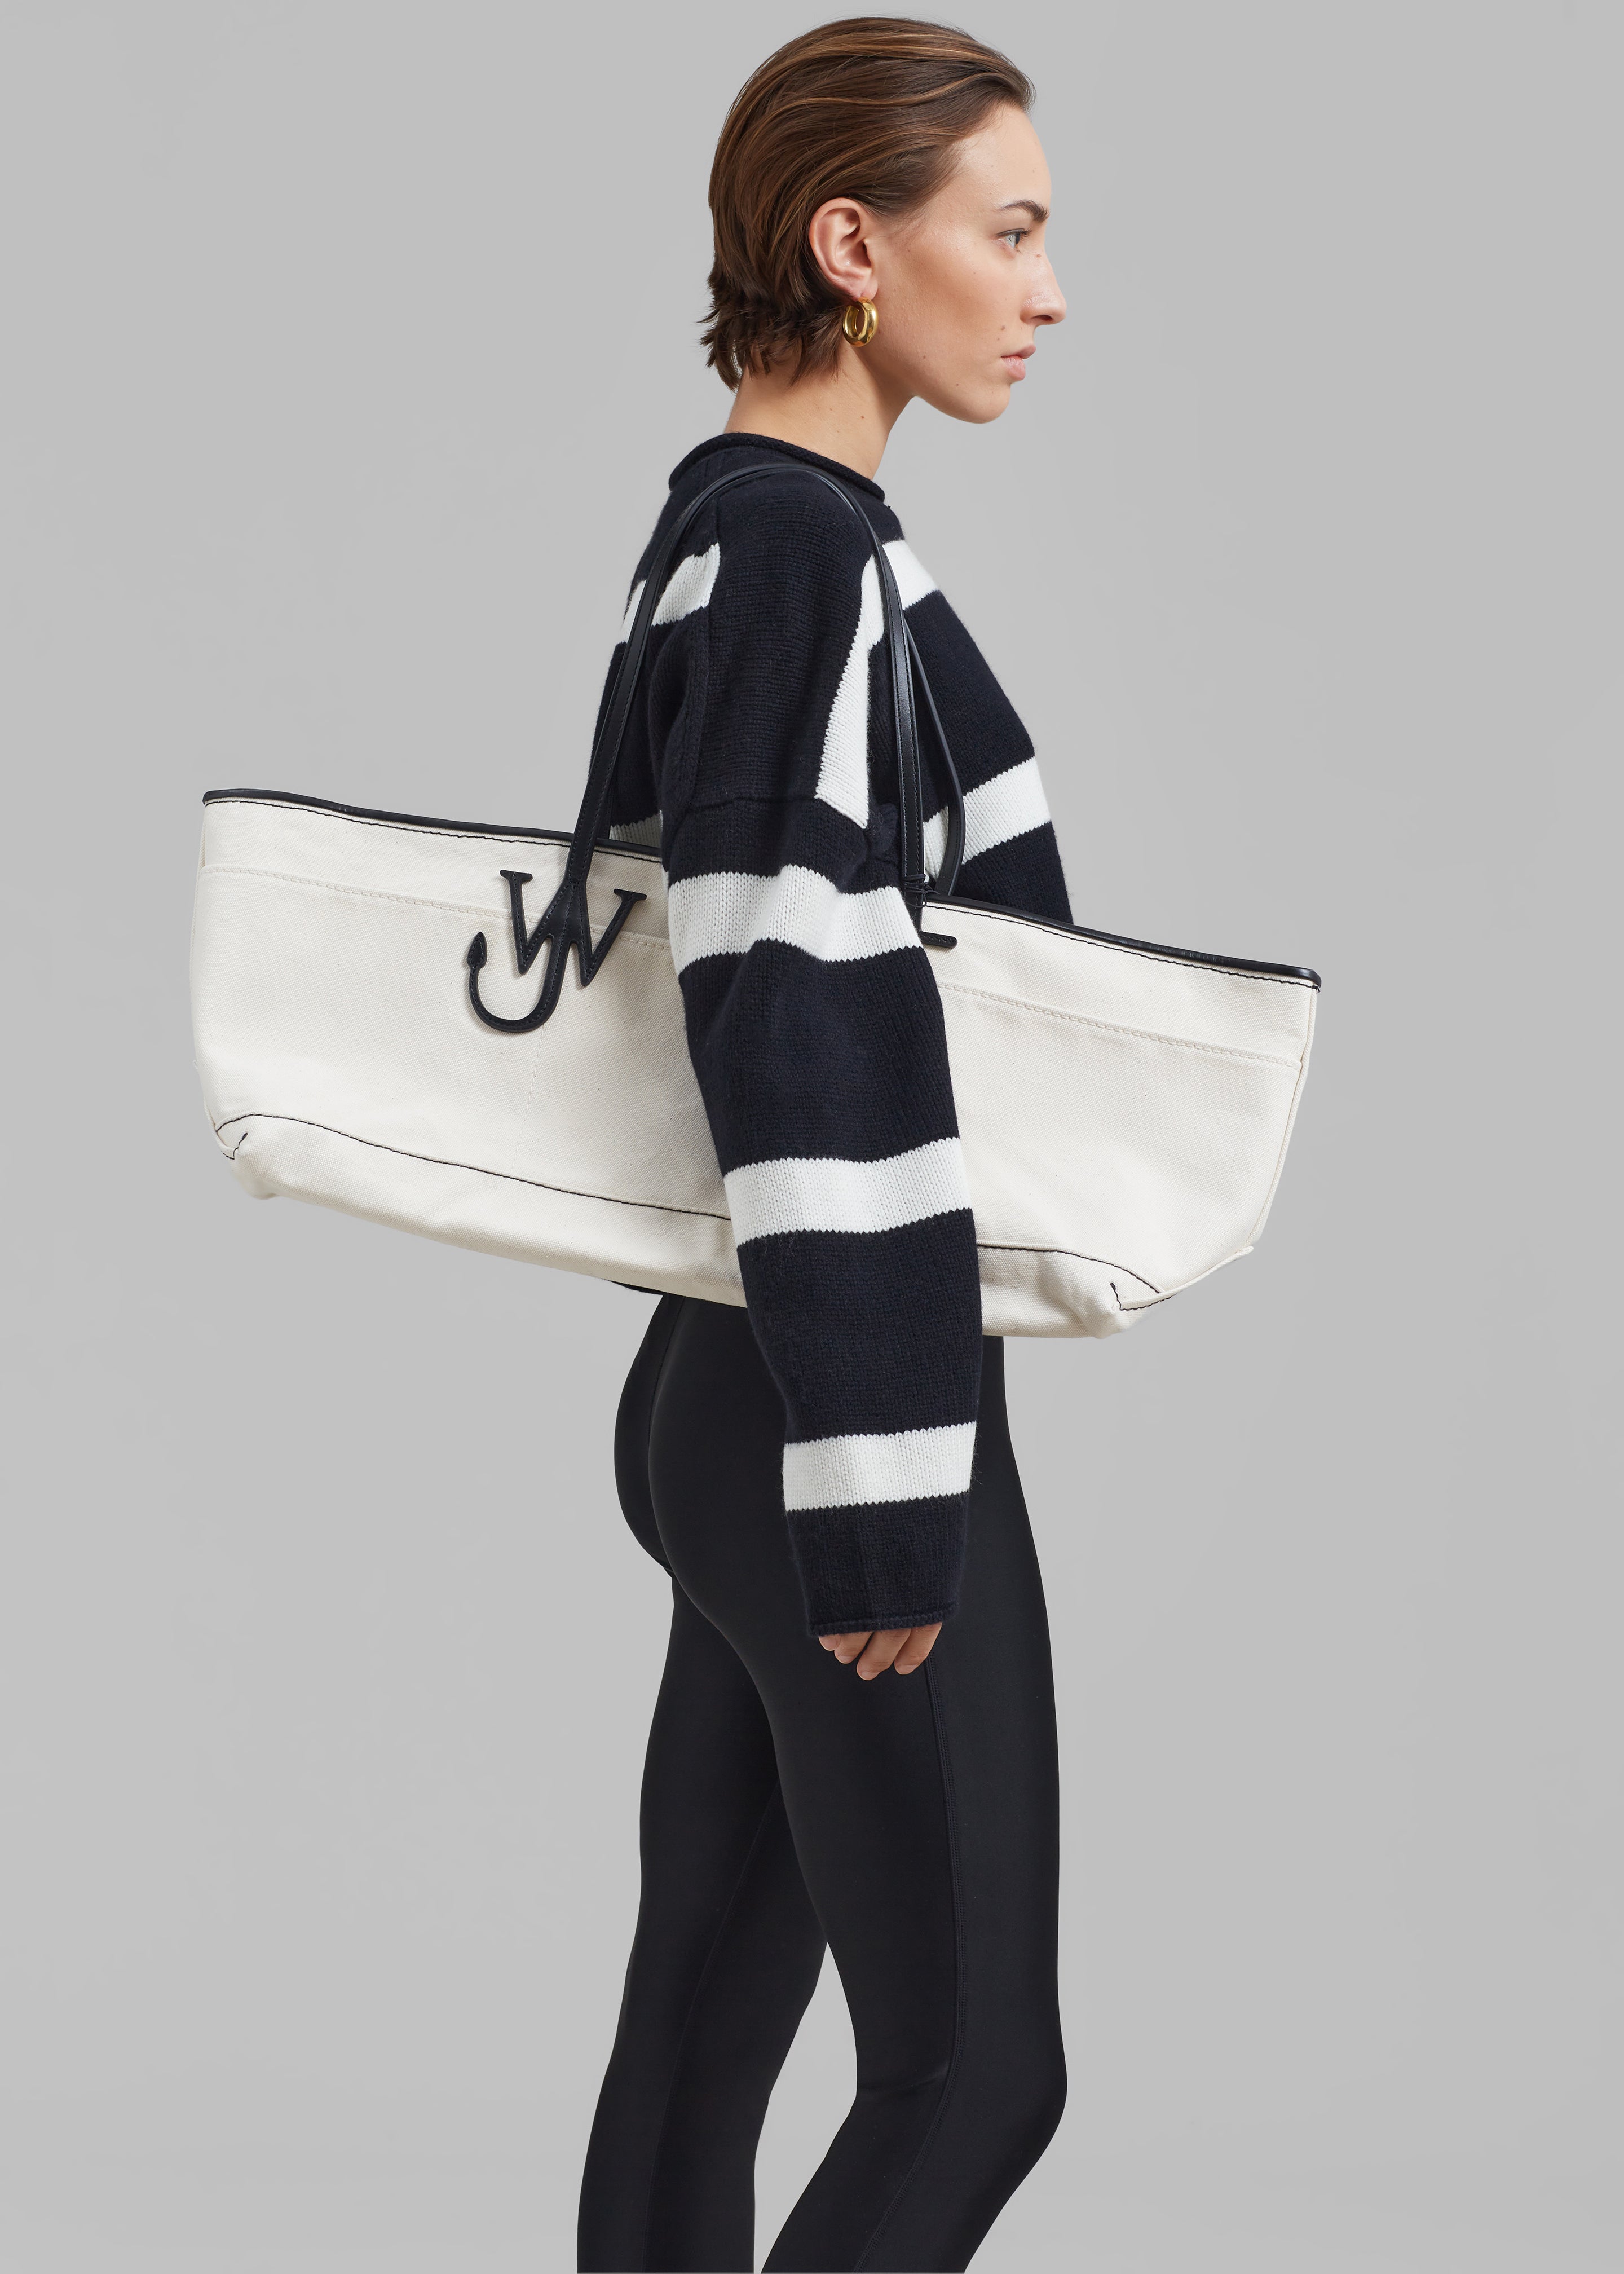 JW Anderson Anchor Stretch Tote - Natural/Black - 4